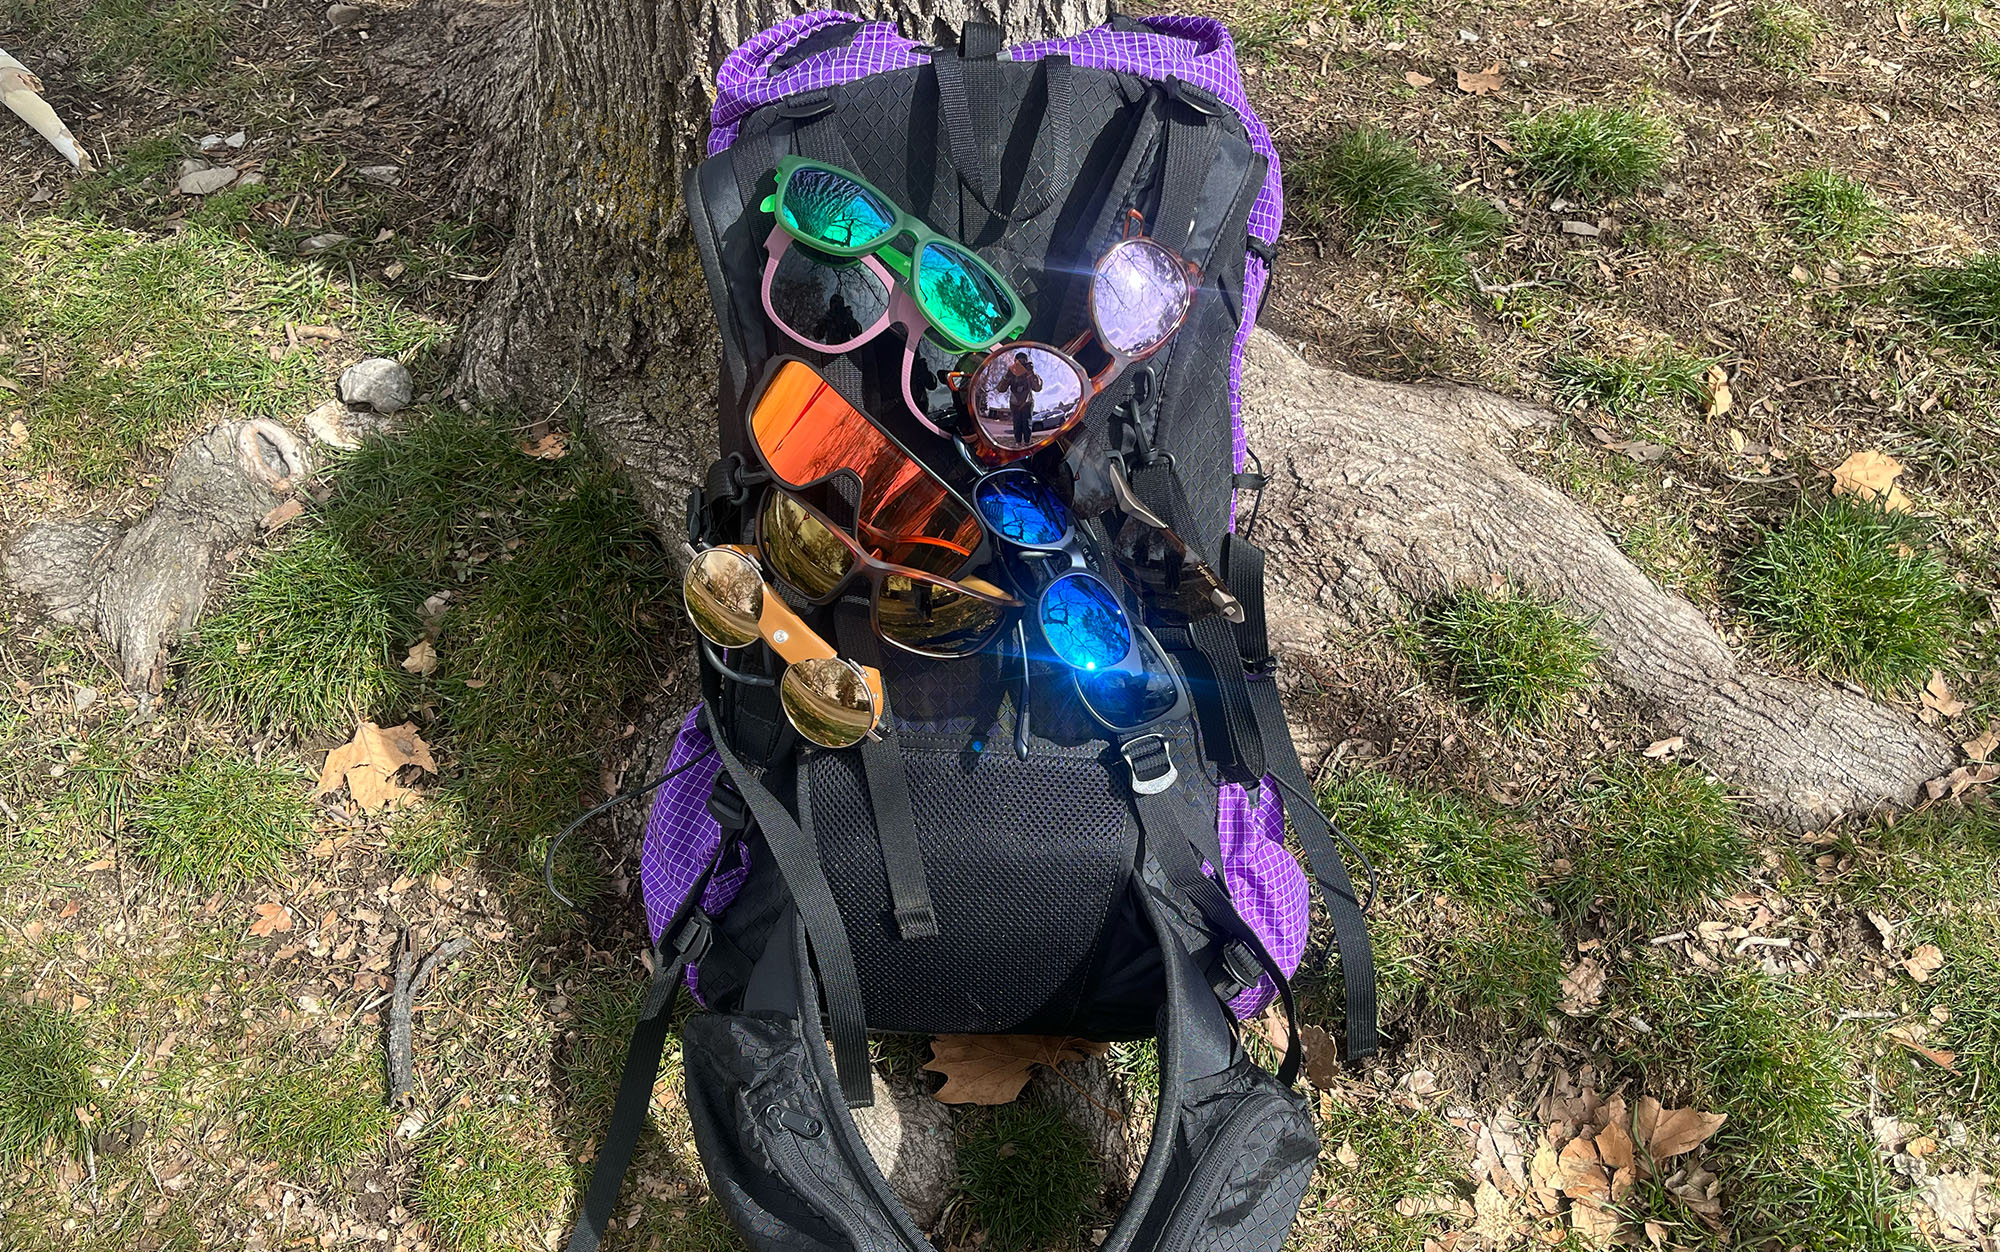 The best hiking sunglasses are attached to a loaded backpack.